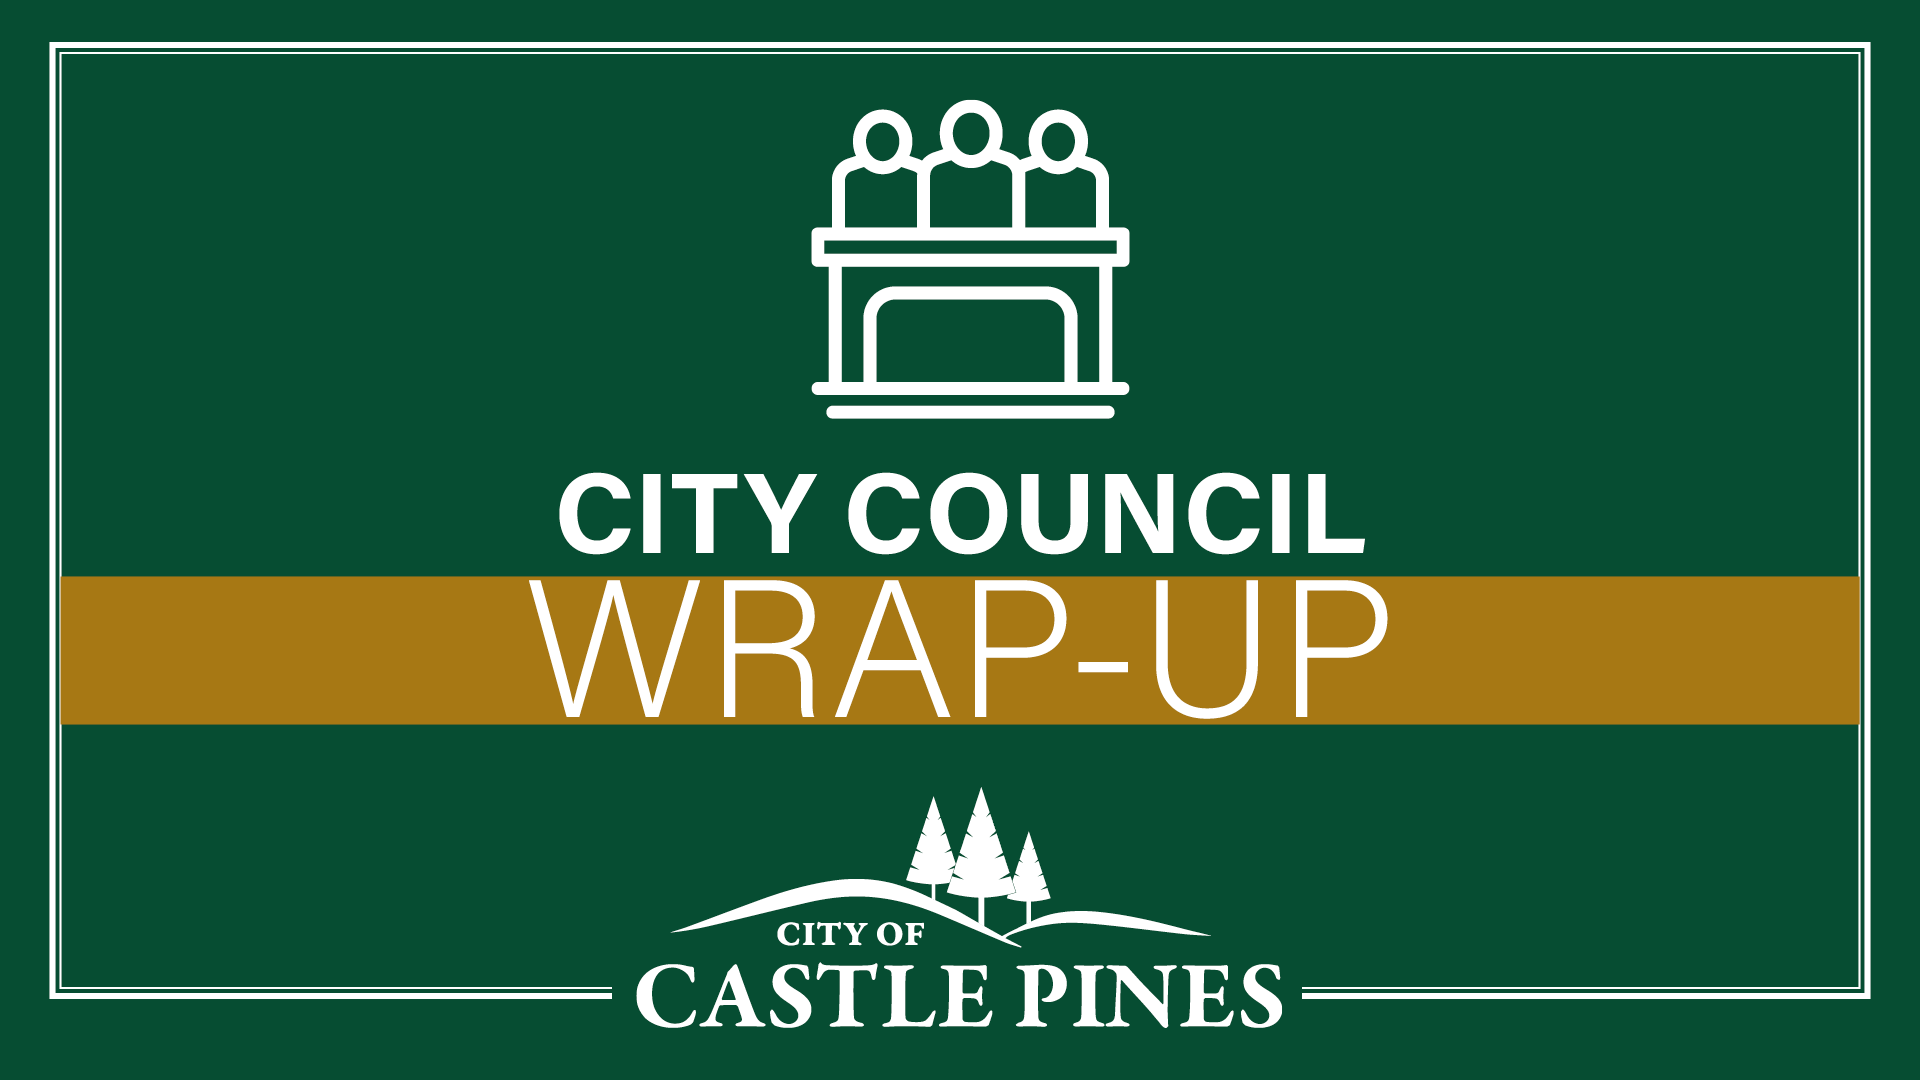 Decorative image with City of Castle Pines logo and City Council Wrap-Up text.